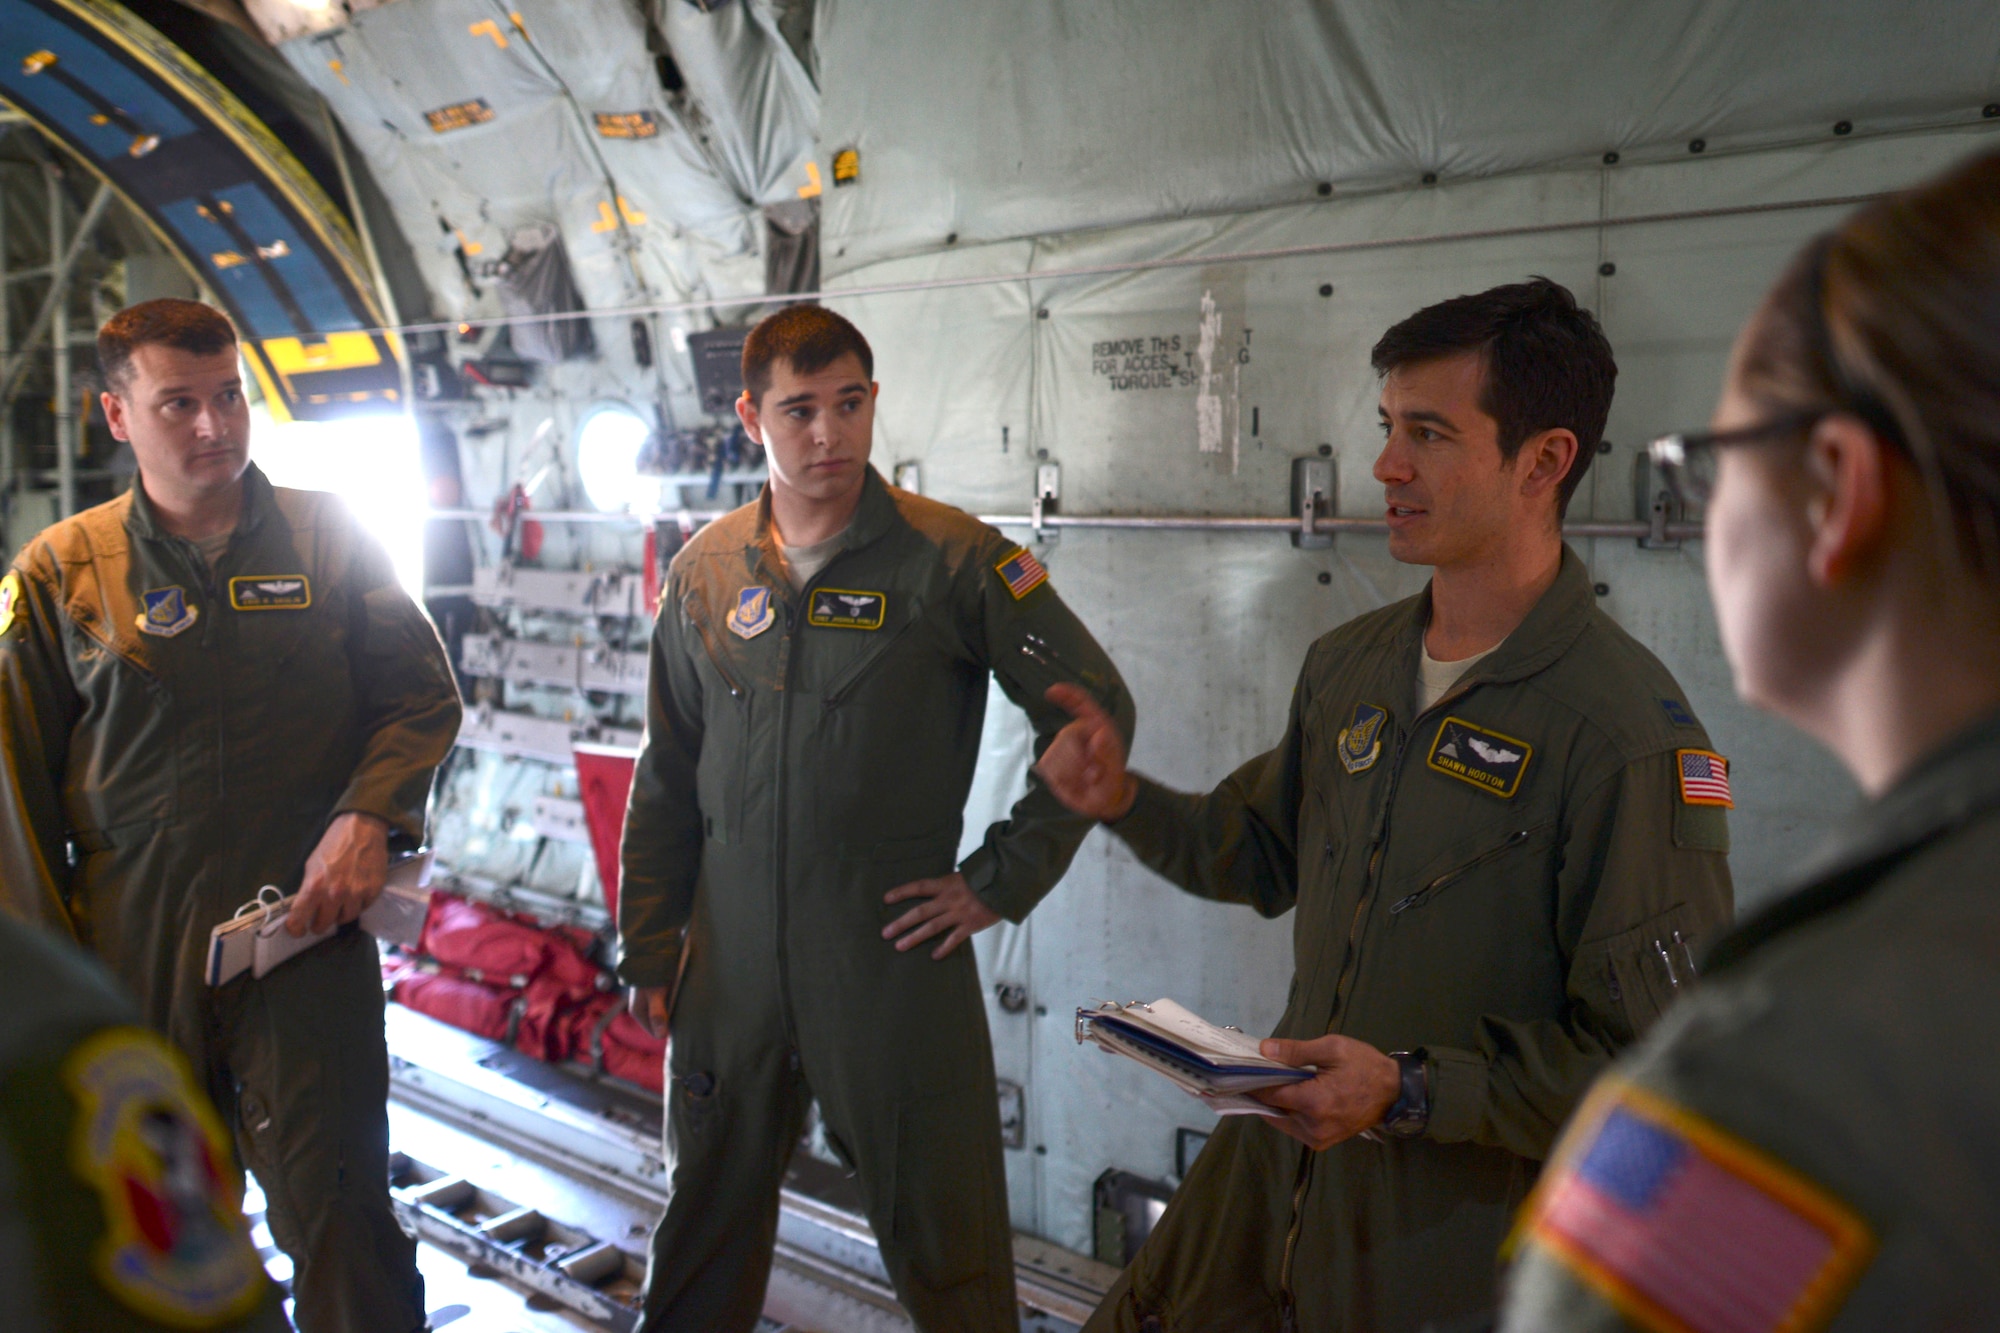 Capt. Shawn Hooton conducts a preflight briefing during Exercise Max Thunder Nov. 19, 2014, at Yokota Air Base, Japan.  Hooton is a C-130 Hercules pilot and flight commander. Hooton flew the lead ship of a three-ship formation during the exercise, practicing evasive combat maneuvers and radar avoidance. (U.S. Air Force photo/Staff Sgt. Cody H. Ramirez)